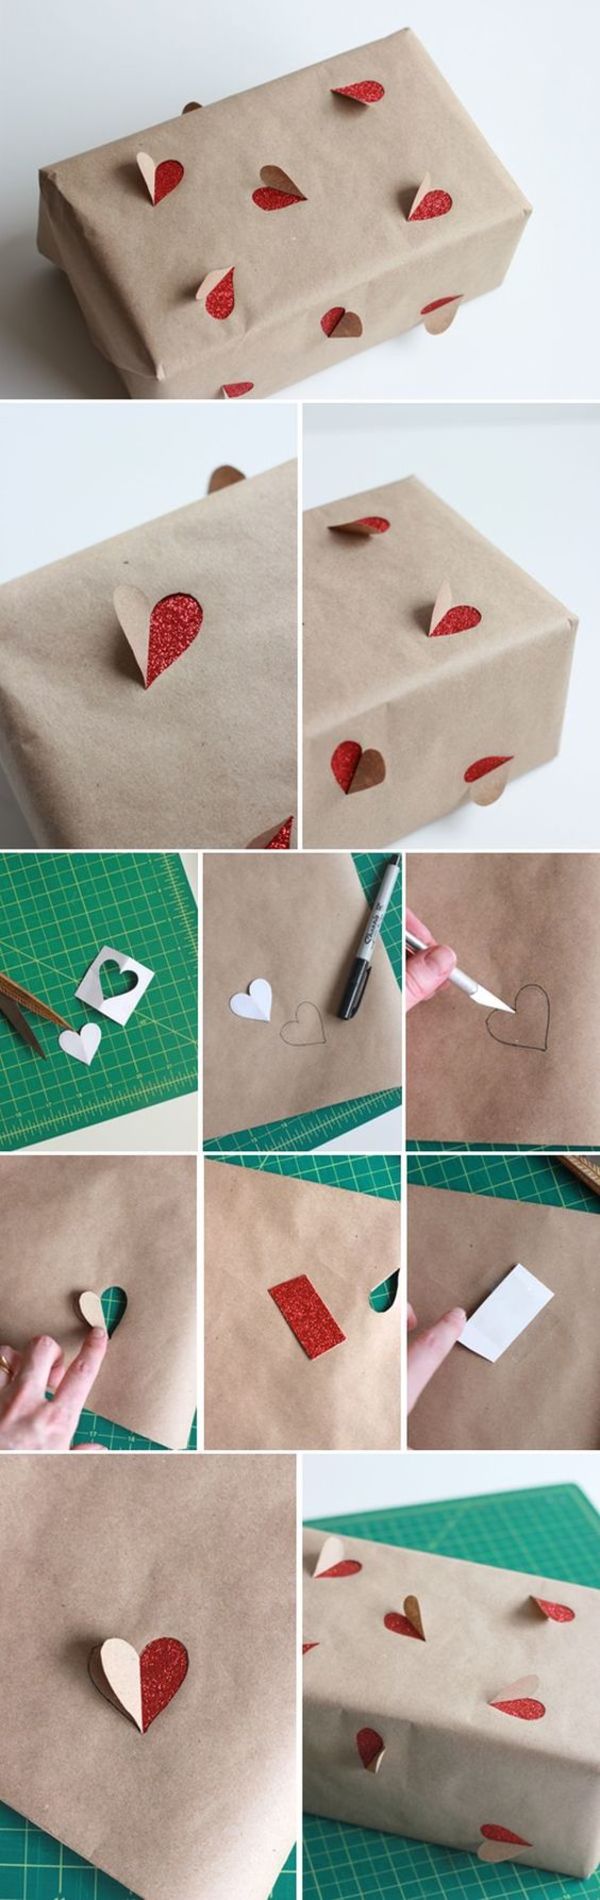 gift wrapping ideas step by step